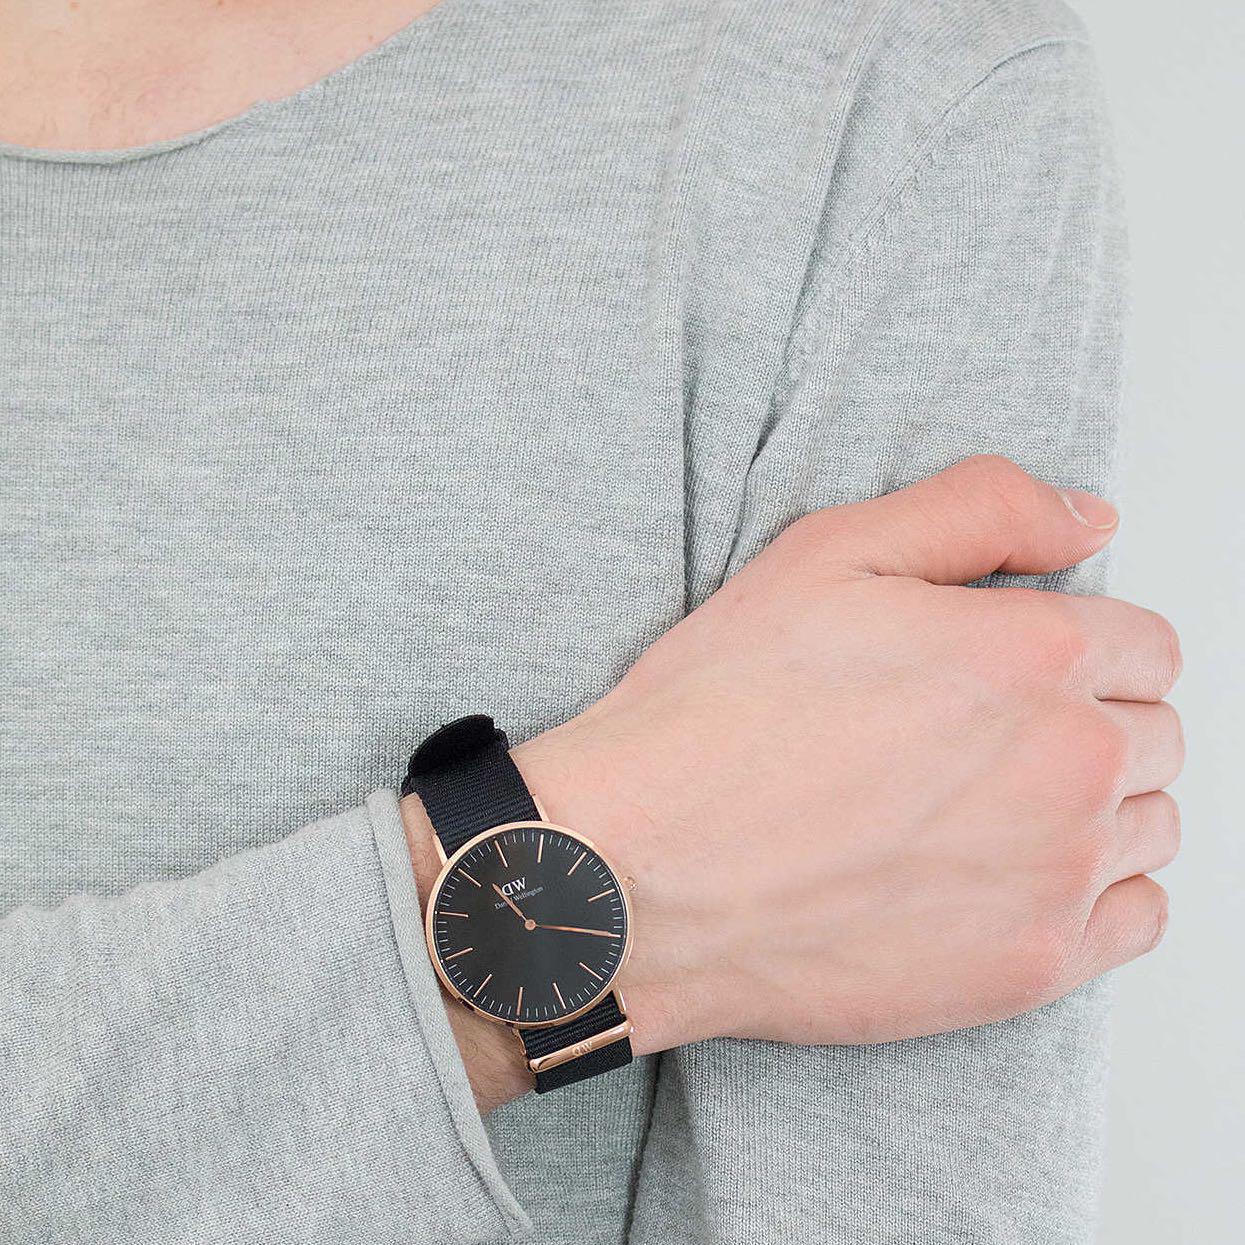 Dw Cornwall Classic Black Daniel Wellington Watches Are Perfect For Any Event And Img Daisy